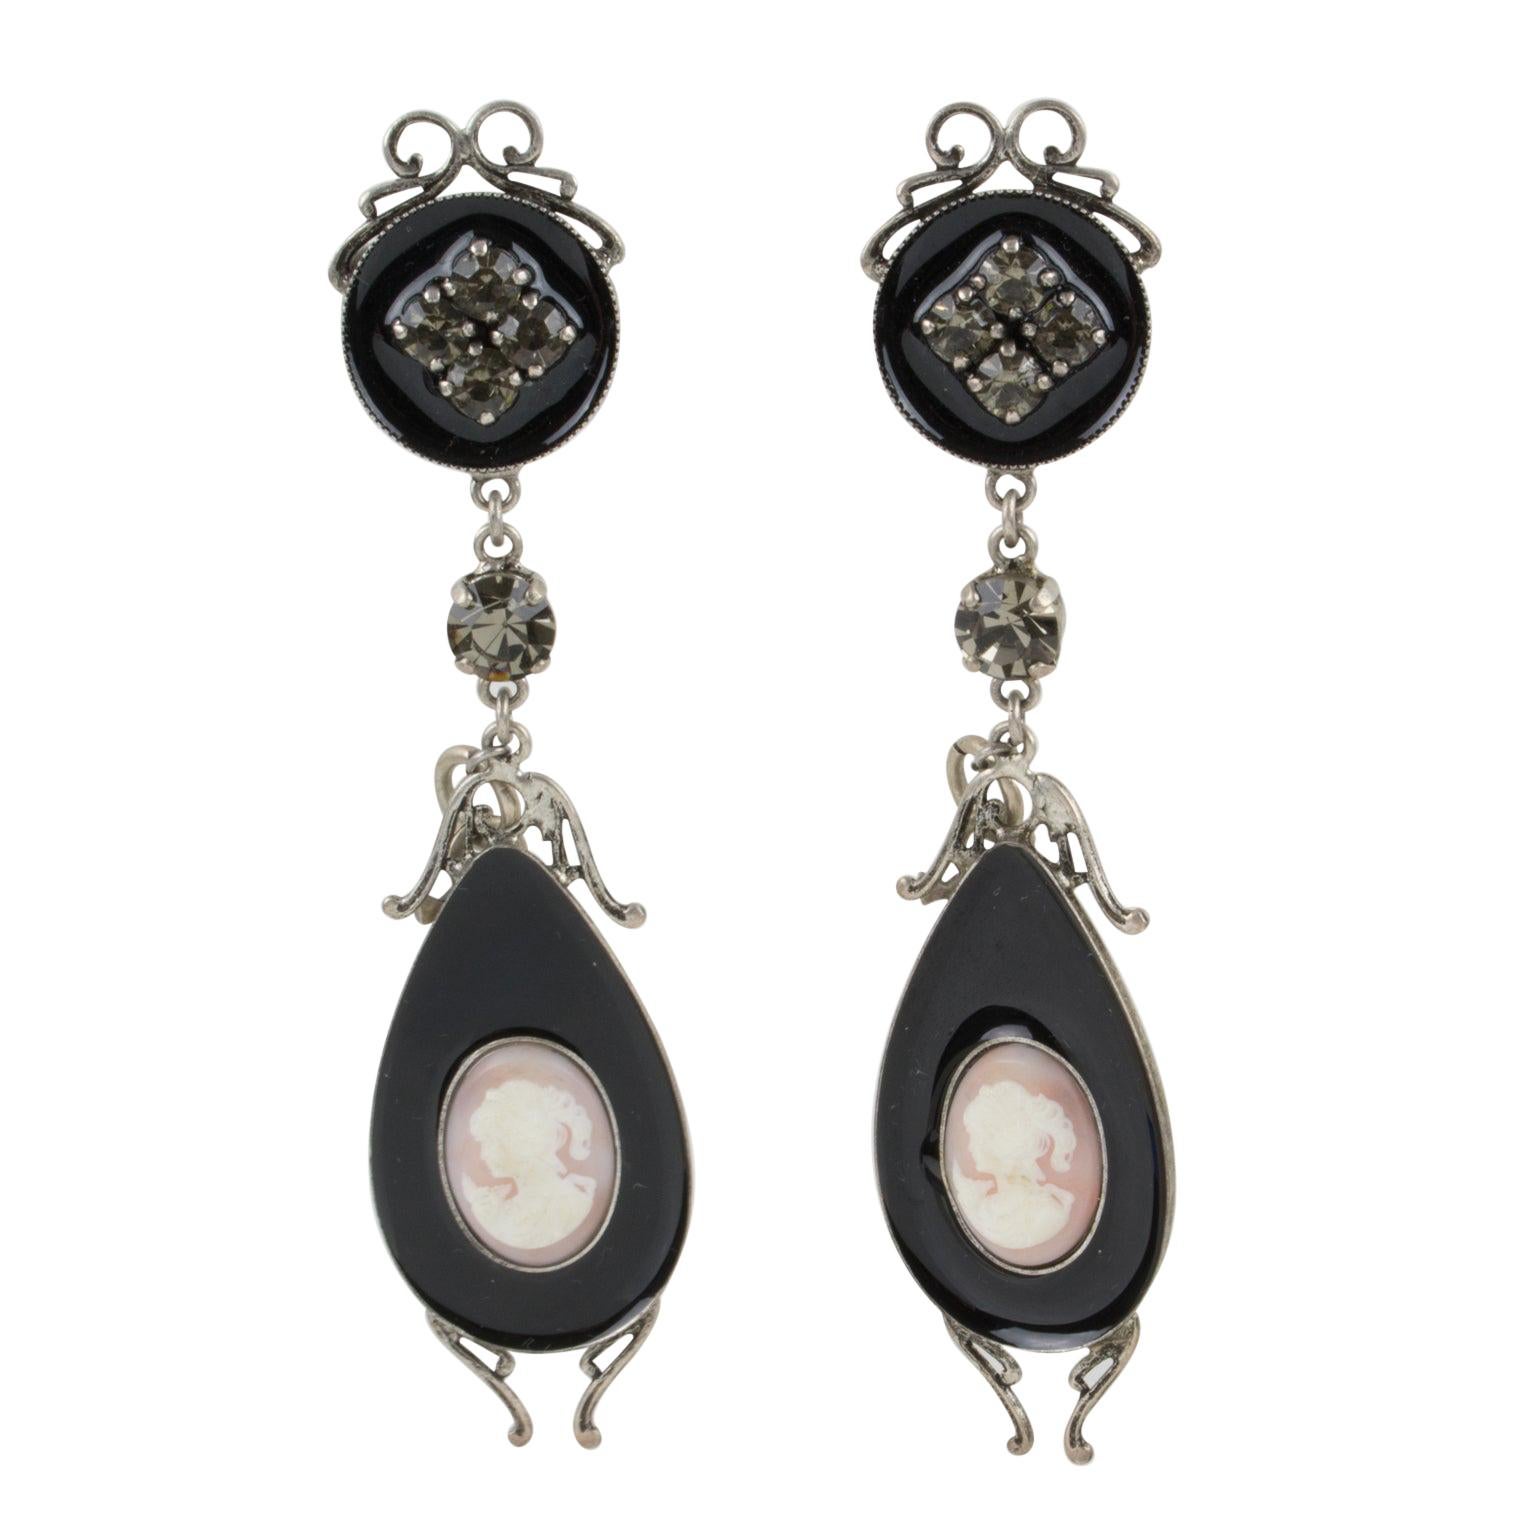 John Galliano Victorian-Inspired Black Enamel and Cameo Dangle Clip Earrings For Sale